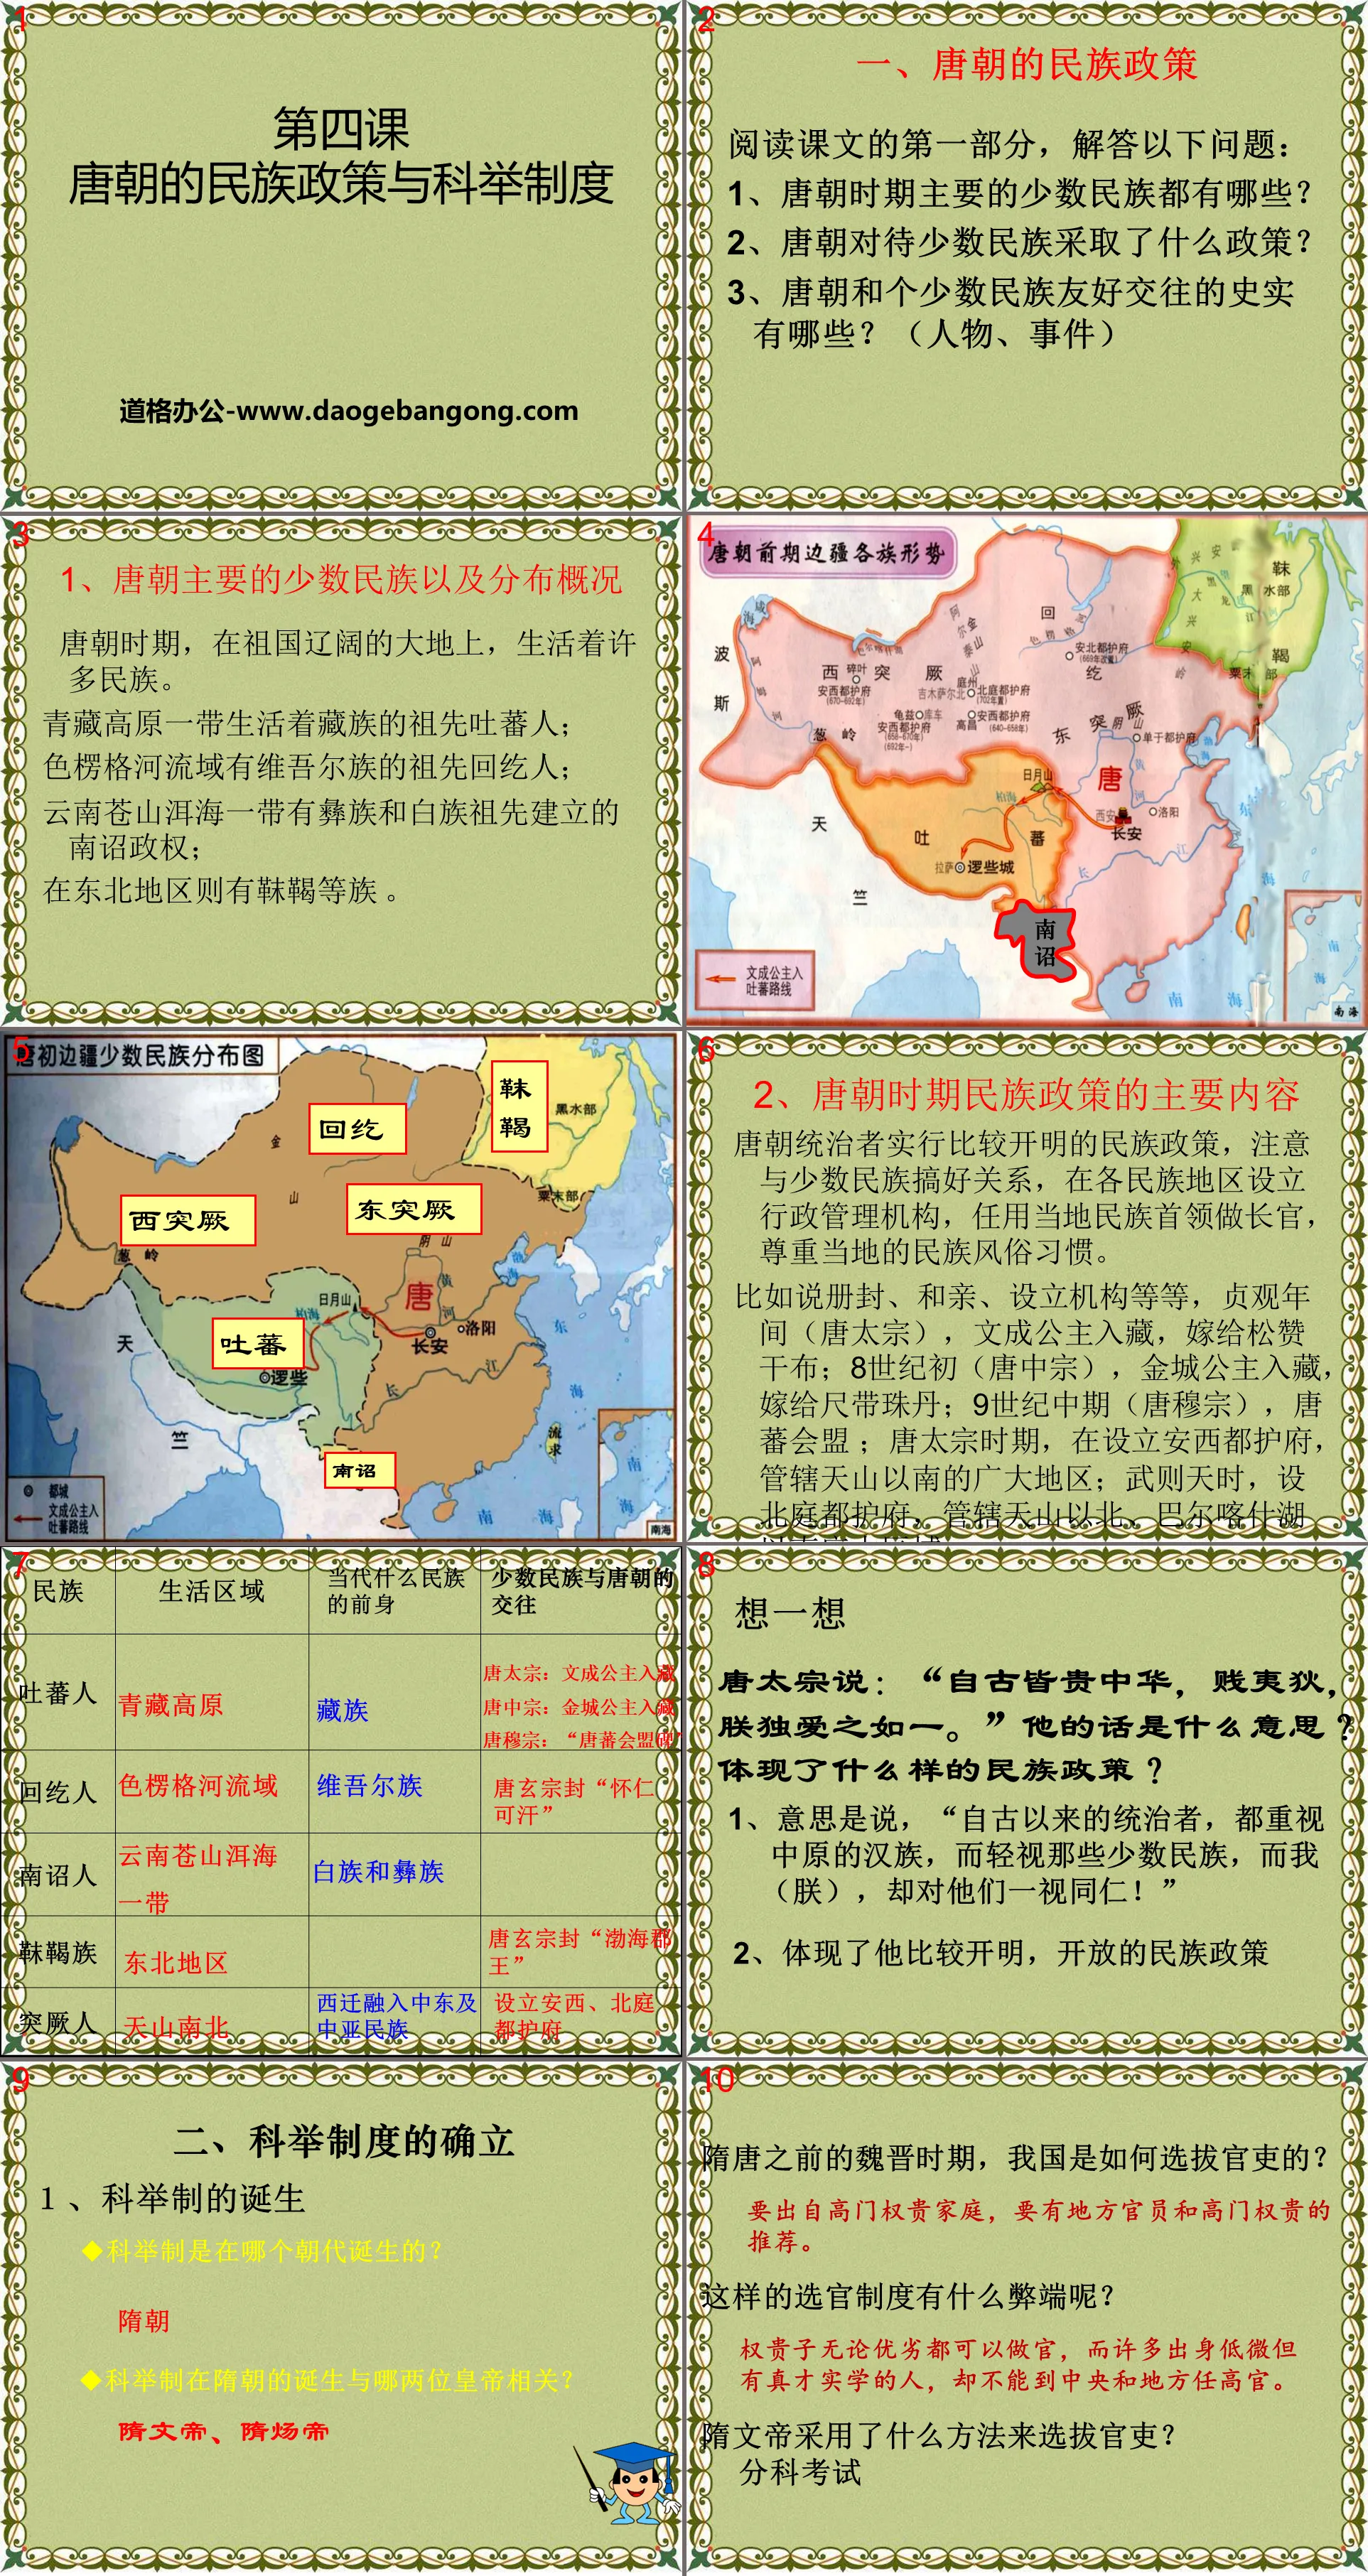 "Ethnic Policies and Imperial Examination System of the Tang Dynasty" Prosperous and Open Society - Sui and Tang Dynasty PPT Courseware 2